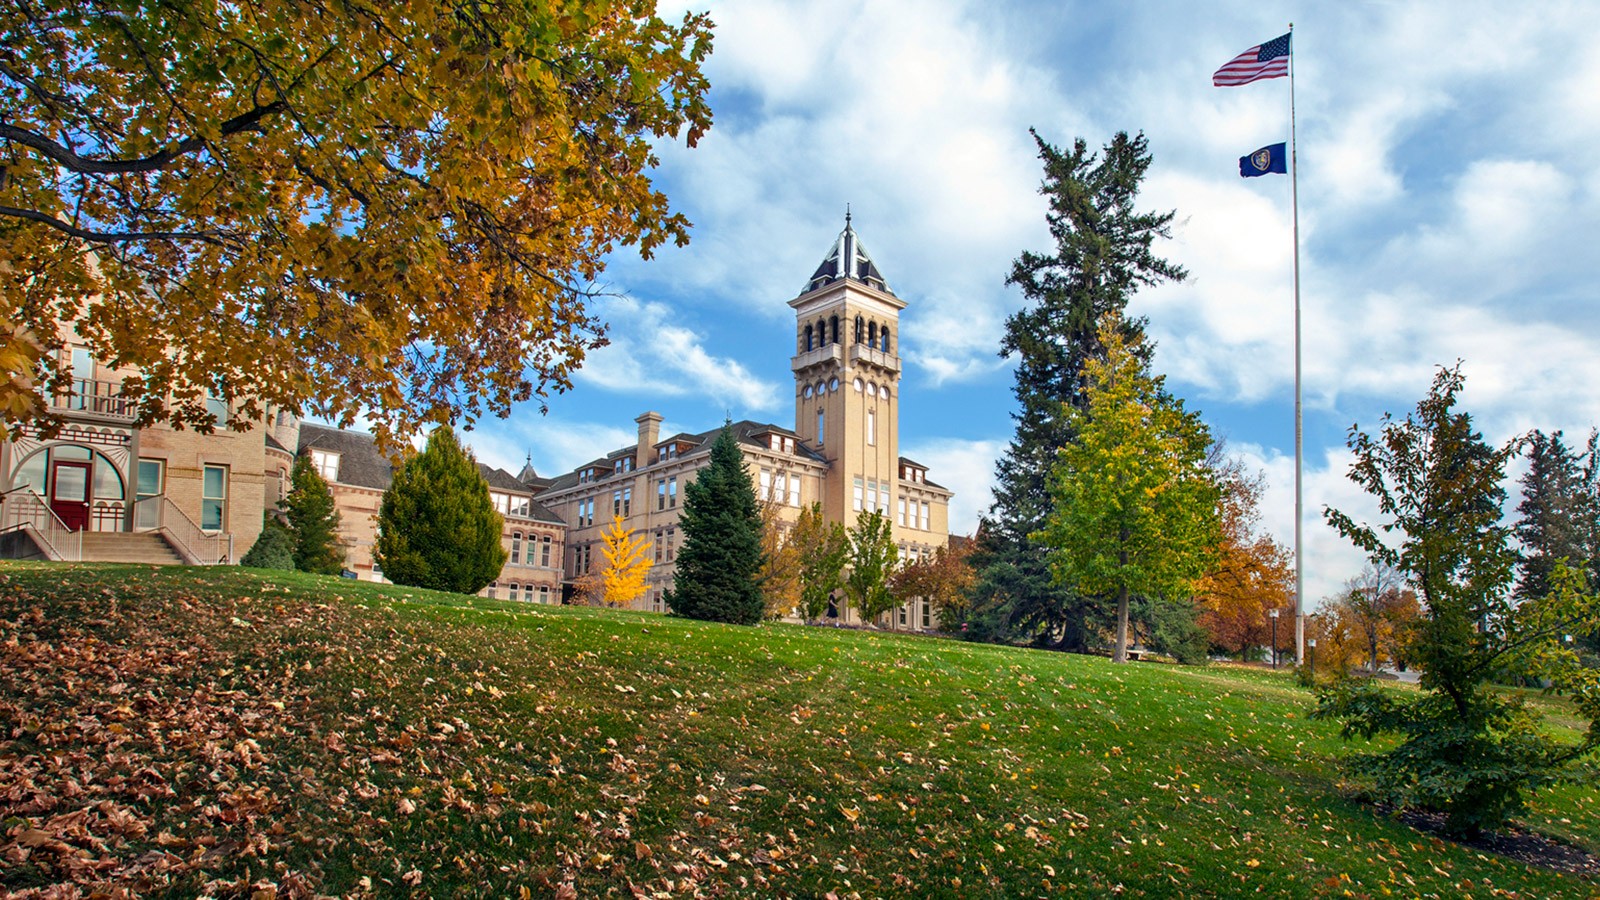 usu academic calendar fall 2021 Usu Announces Changes To The Fall Semester Schedule And Community Expectations usu academic calendar fall 2021